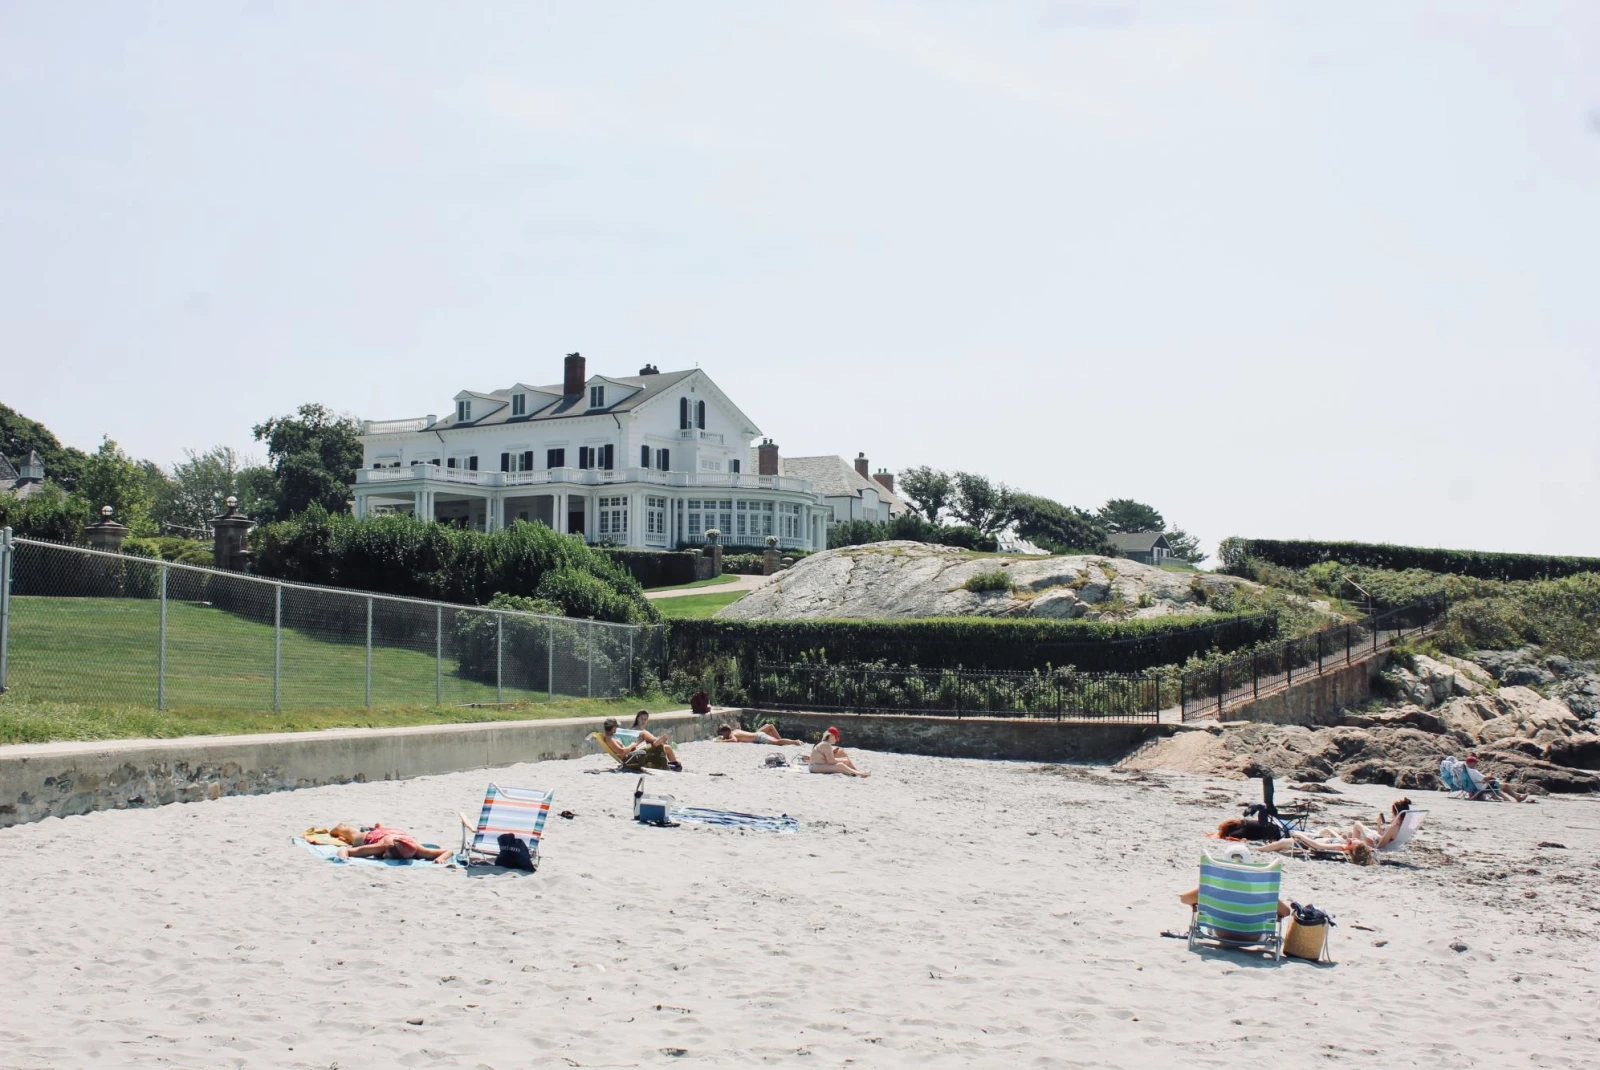 Beachgoers relaxing on the beach in front of mansion on a summer day in Newport, Rhode Island.